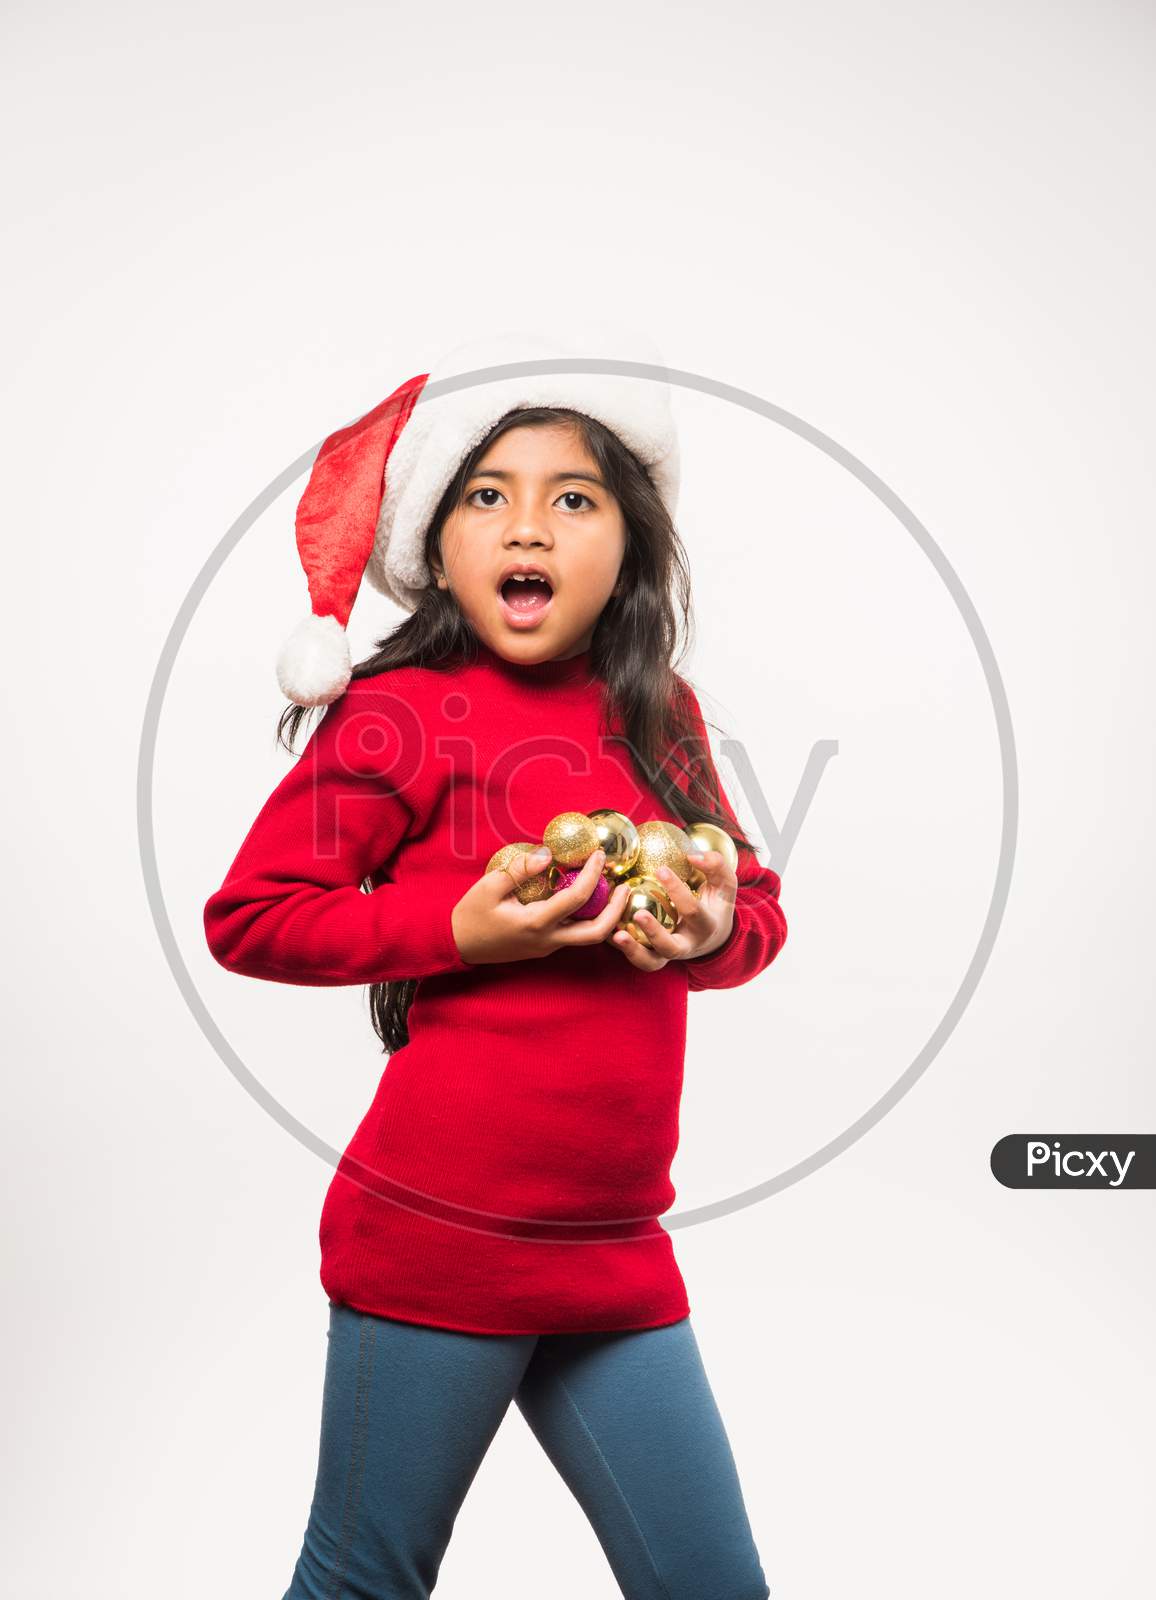 Cute little indian/asian girl celebrating Christmas while sitting in a Cardboard Box against red brick wall, indoor